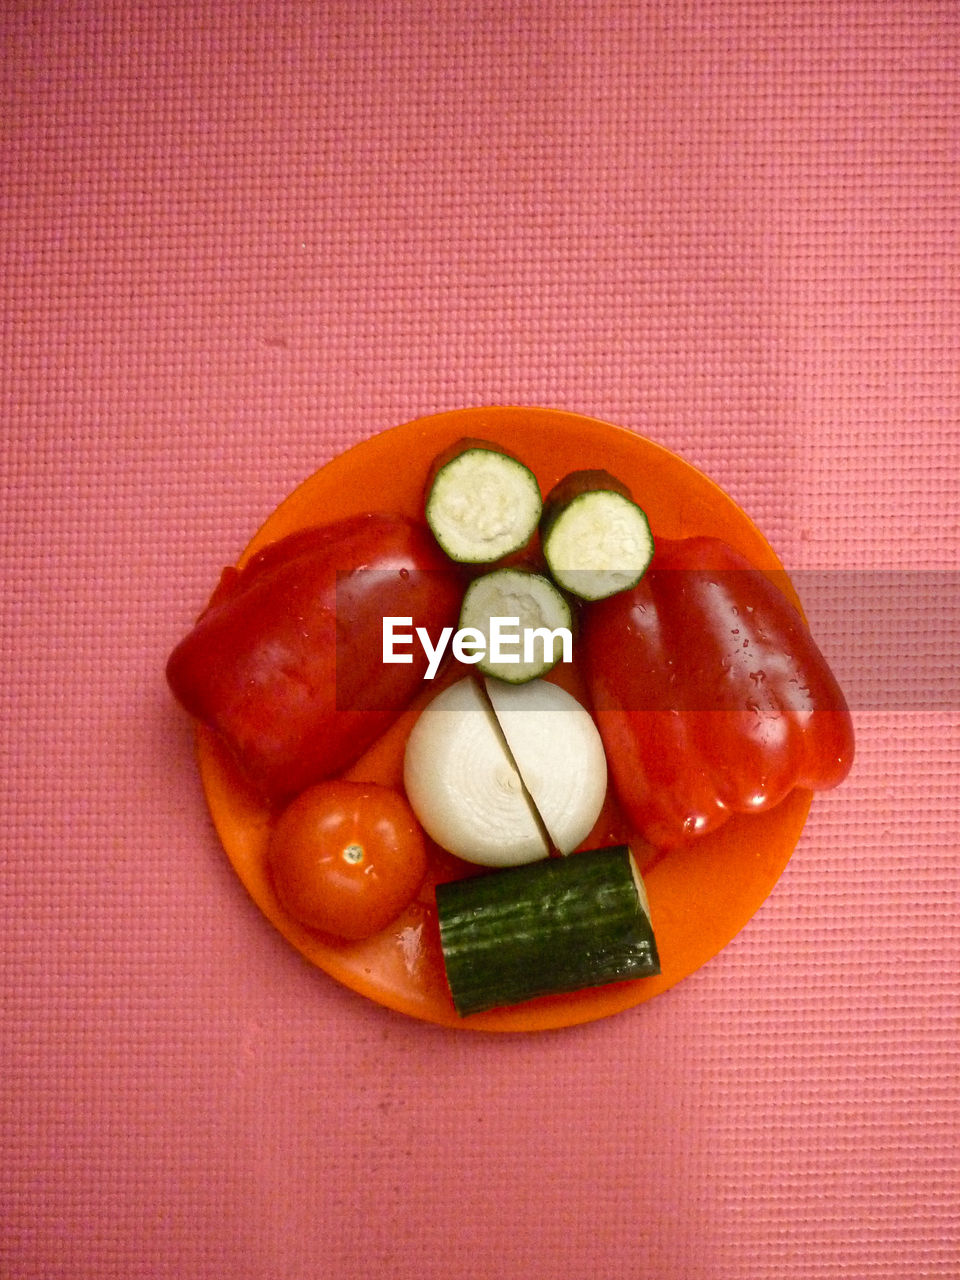 HIGH ANGLE VIEW OF FRUITS AND VEGETABLES ON PLATE